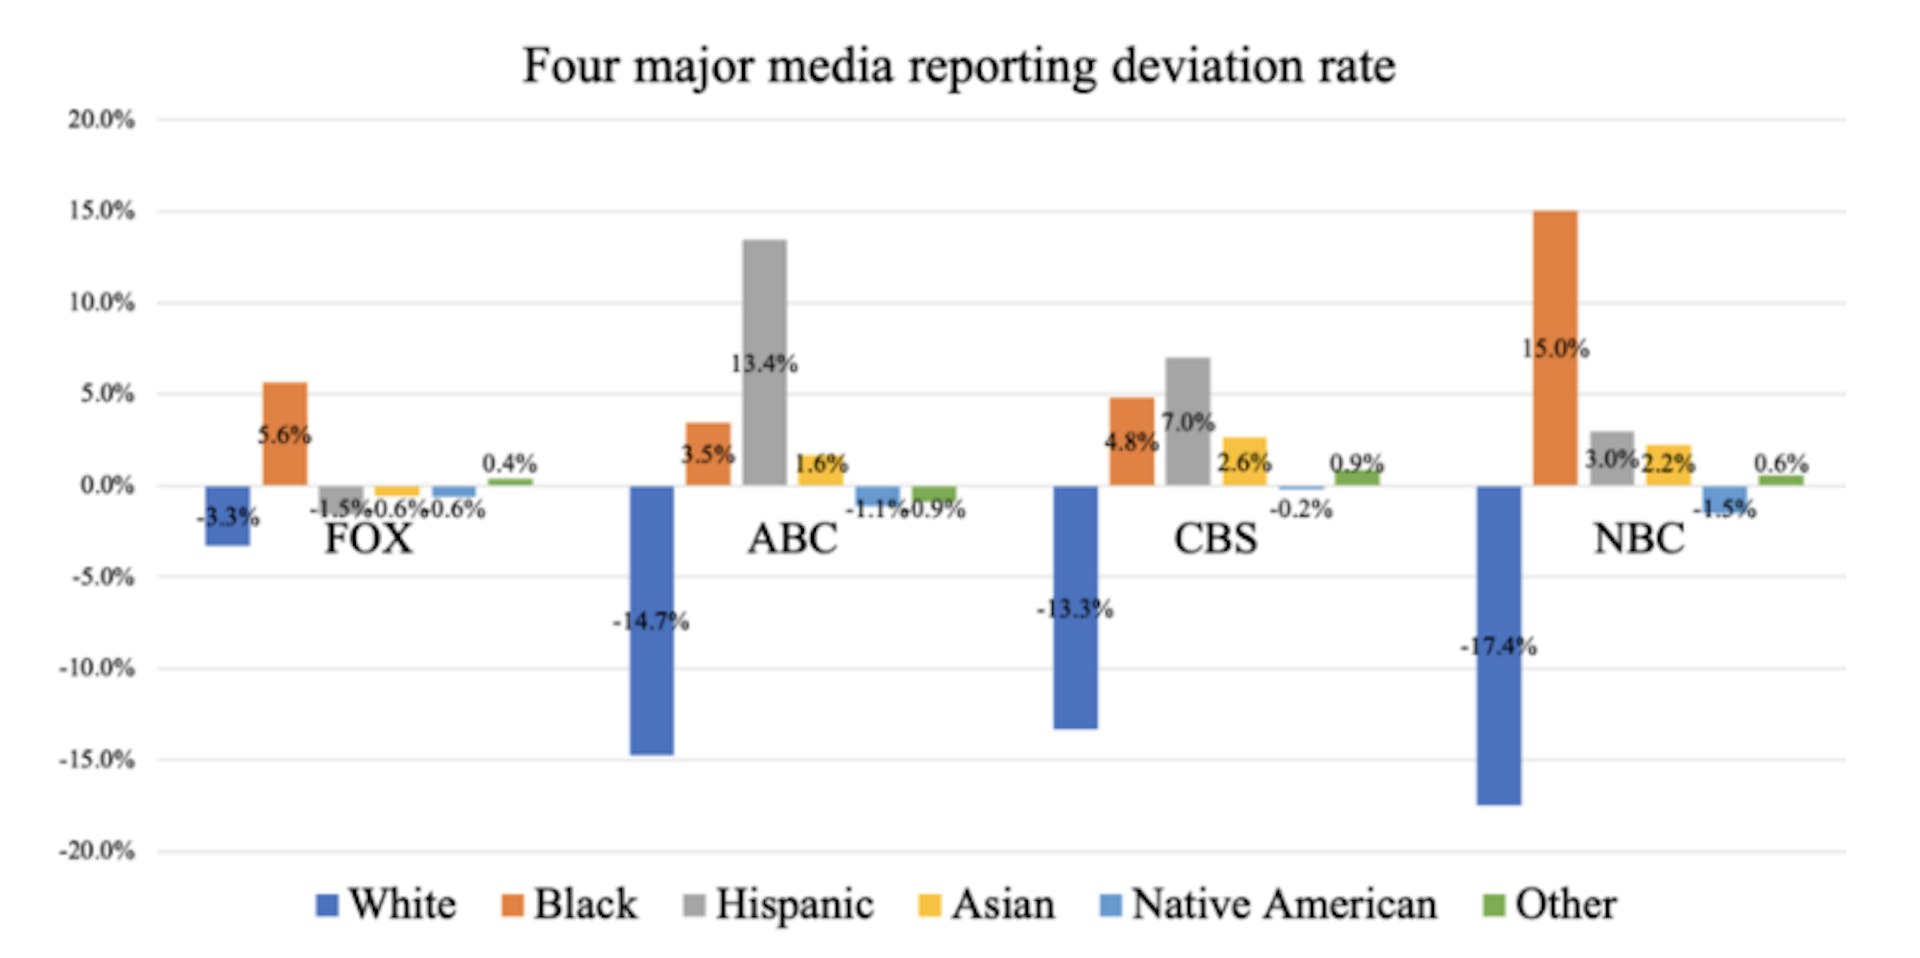 Figure 6. Four major media reporting deviation rate